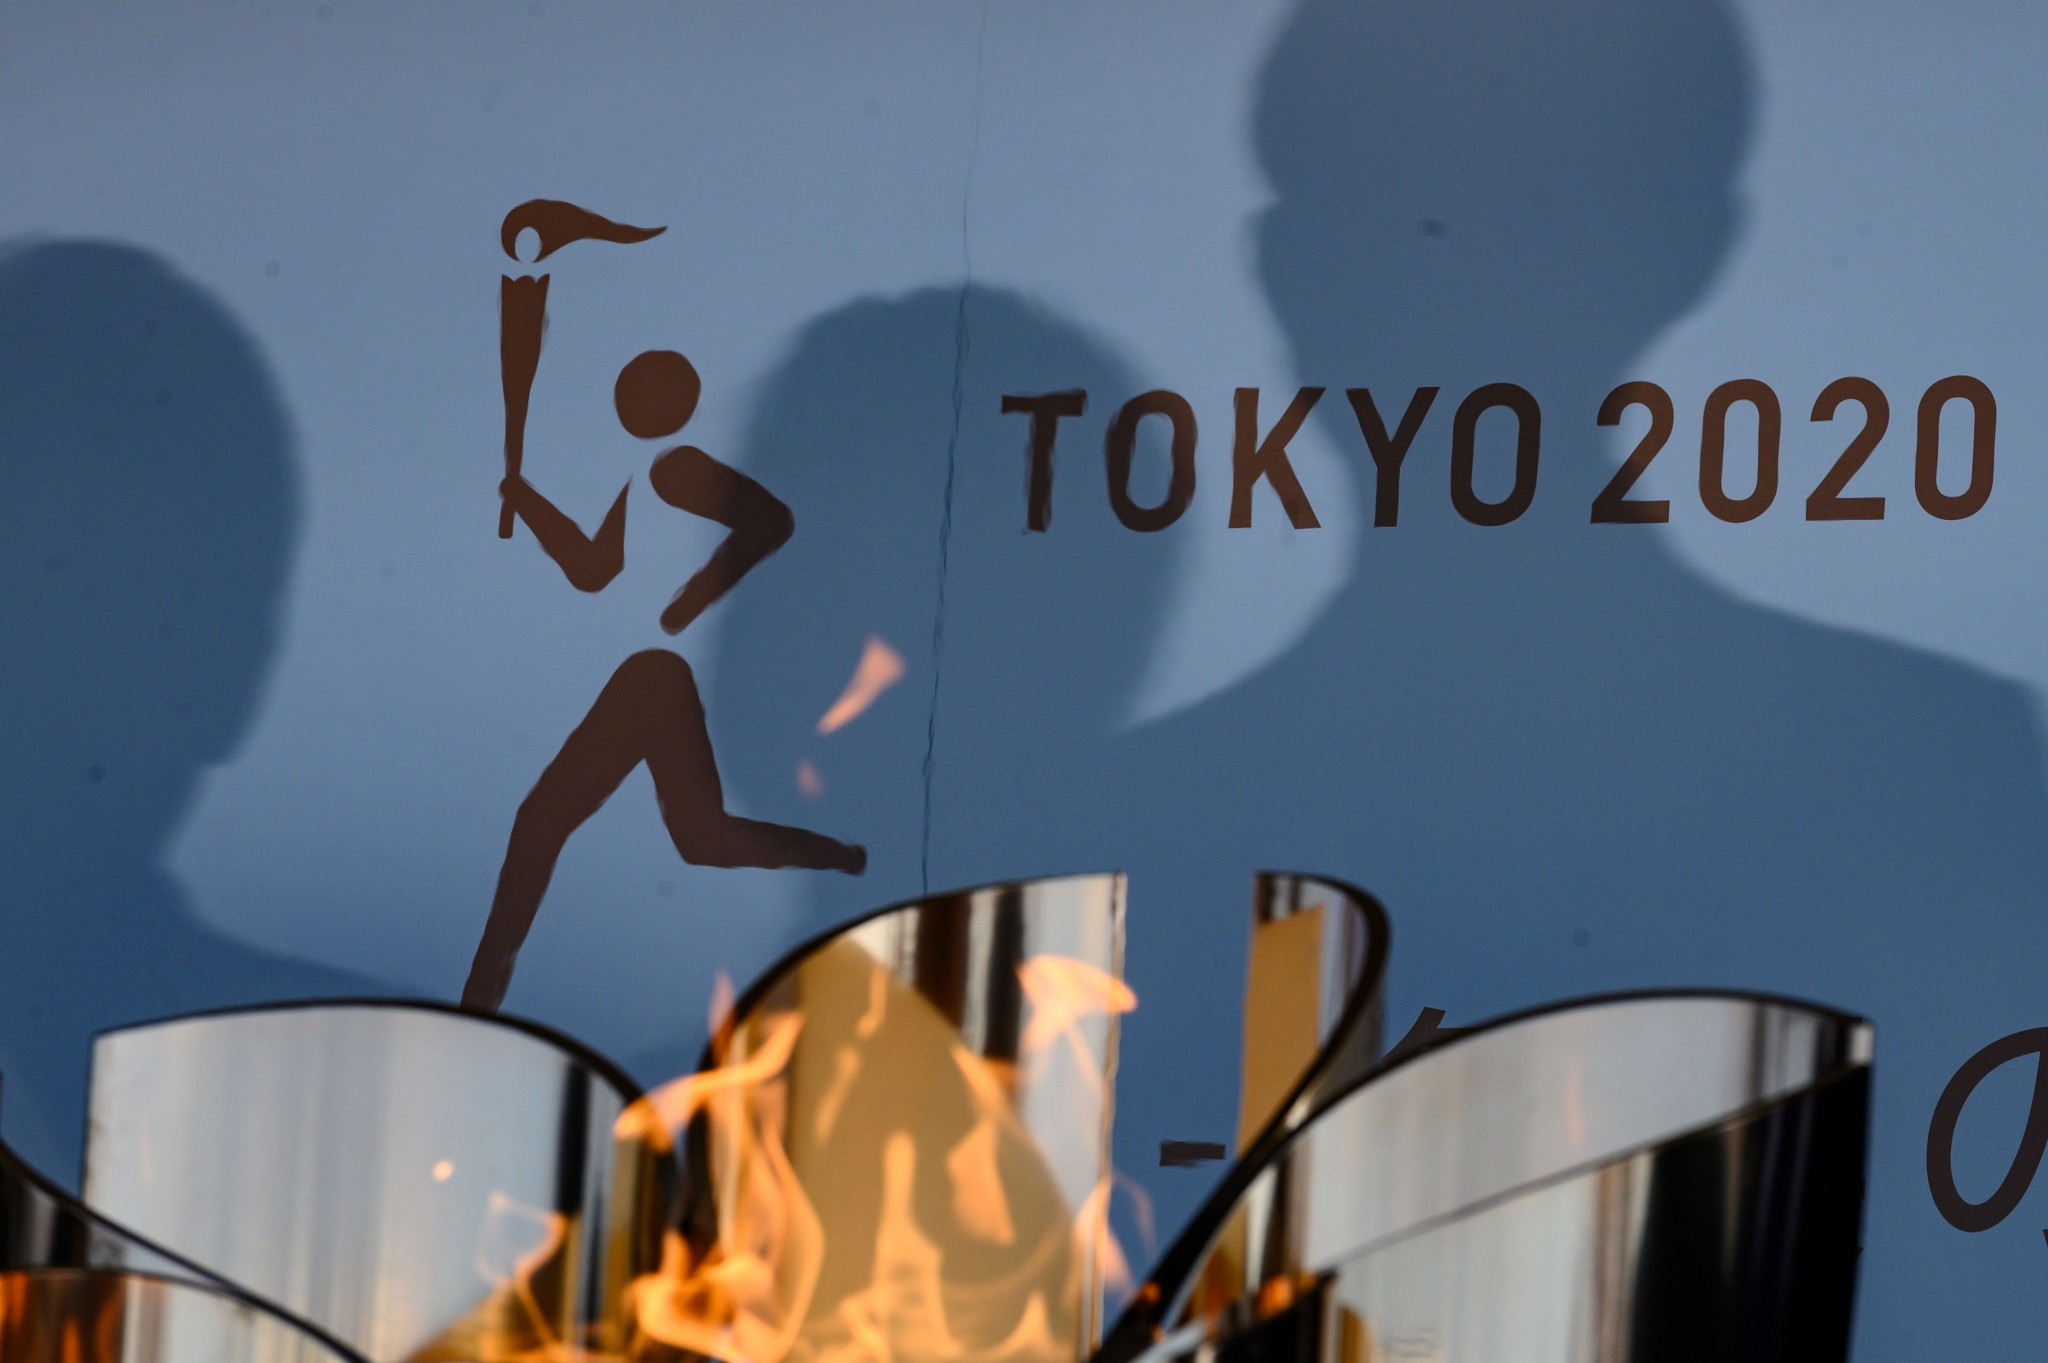 Tokyo 2020 said they will consider how this year's Torchbearers can be given priority in the selection process for the rescheduled Torch Relay ©Getty Images